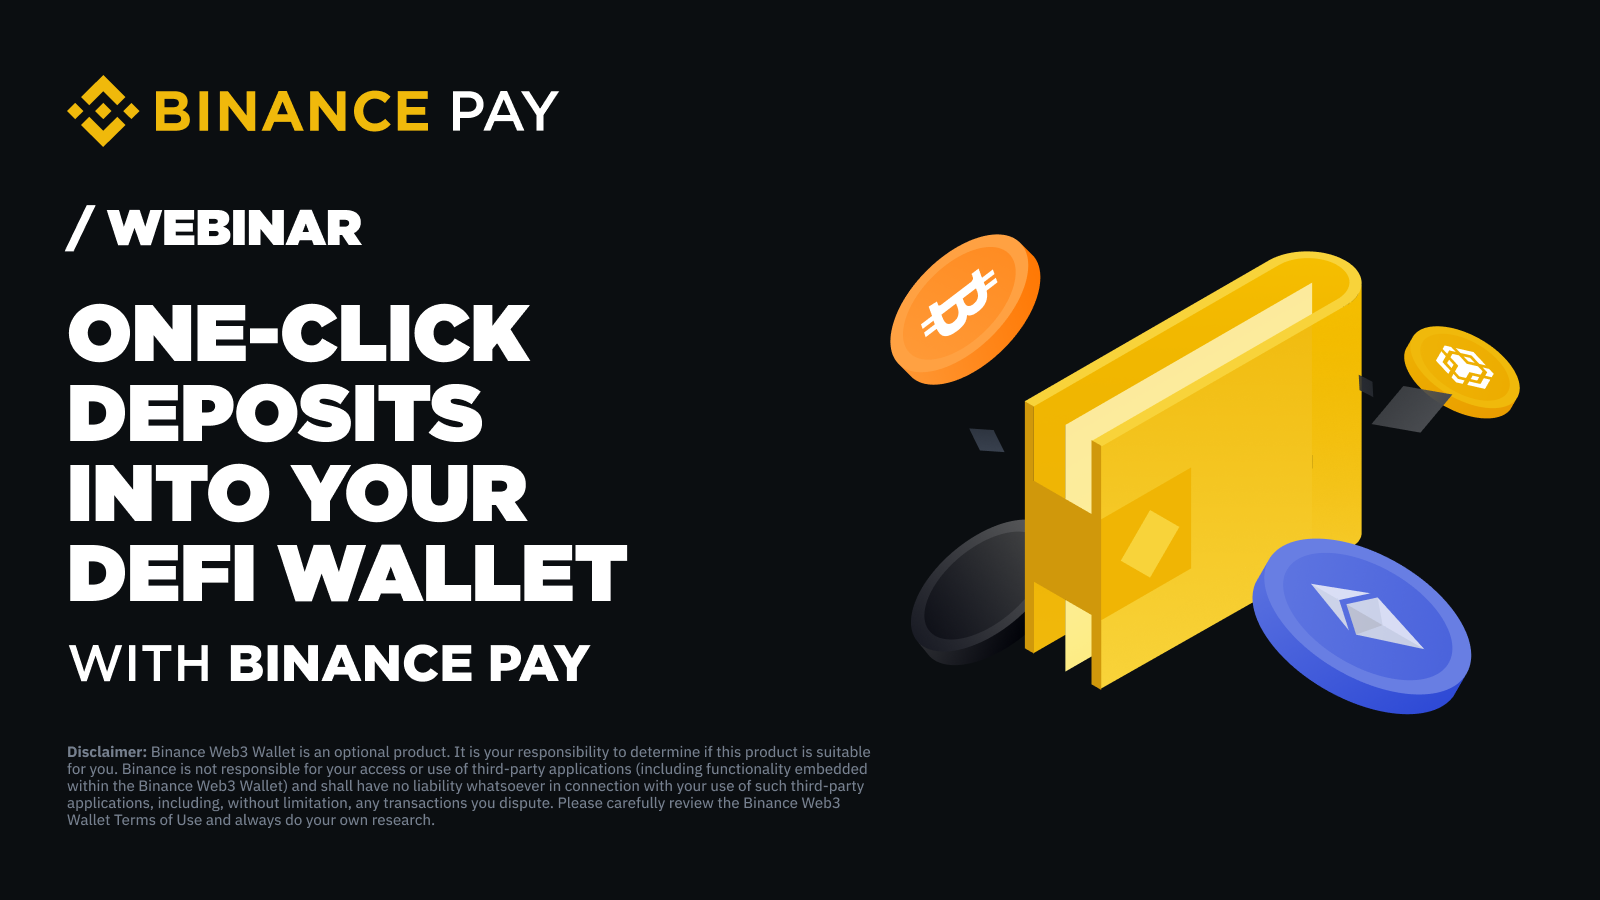 Binance Pay Guide: One-Click Deposits into your DeFi Wallet